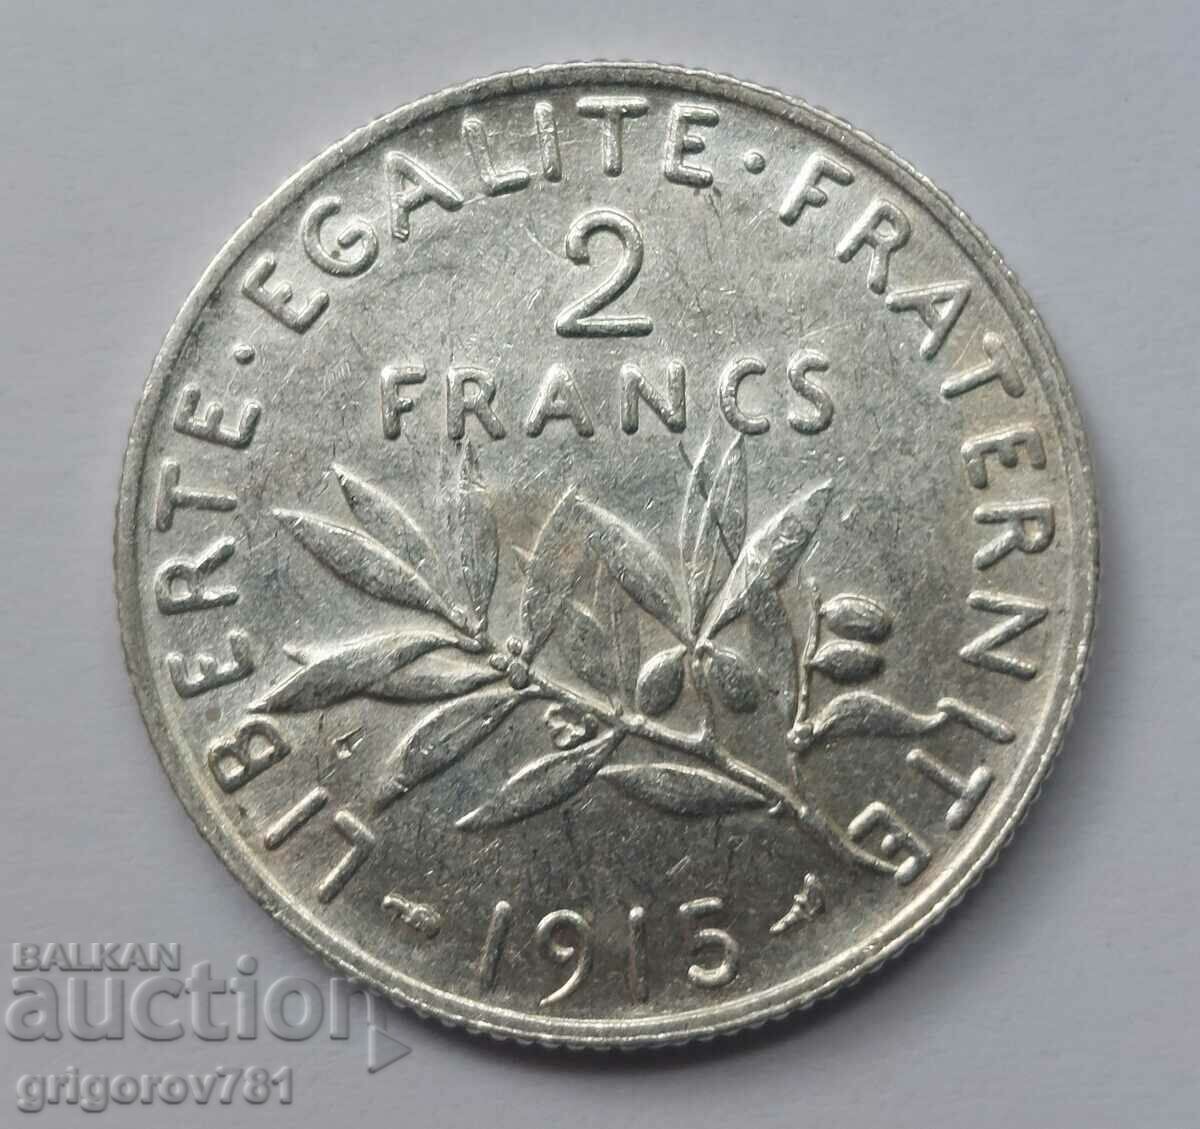 2 Francs Silver France 1915 - Silver Coin #58